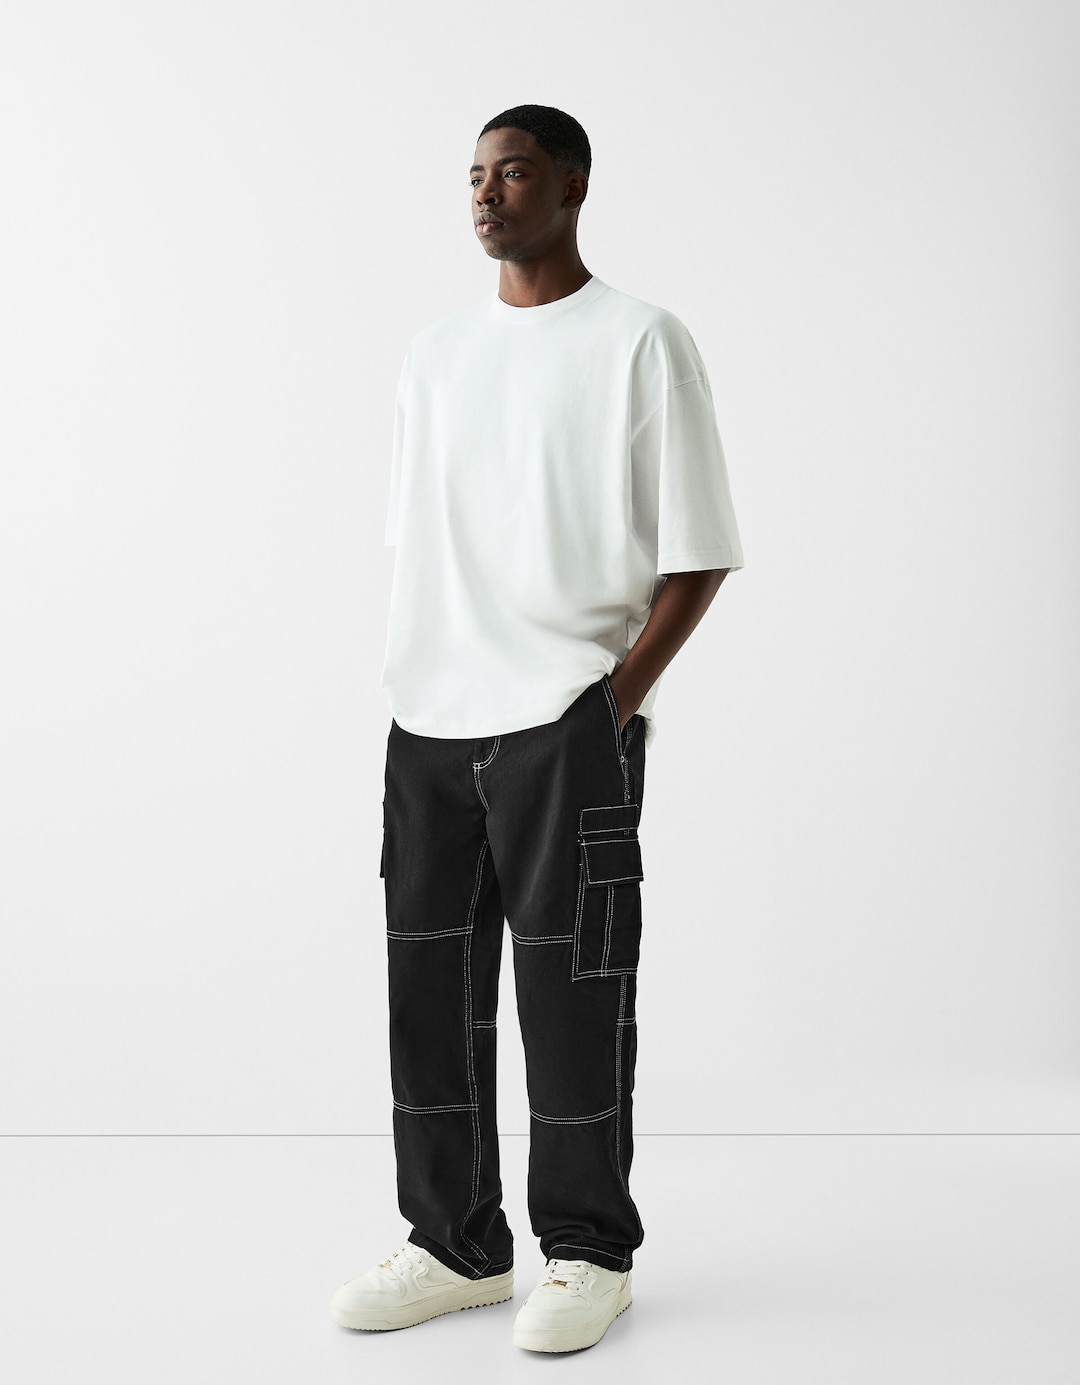 Cotton cargo trousers with contrast seams